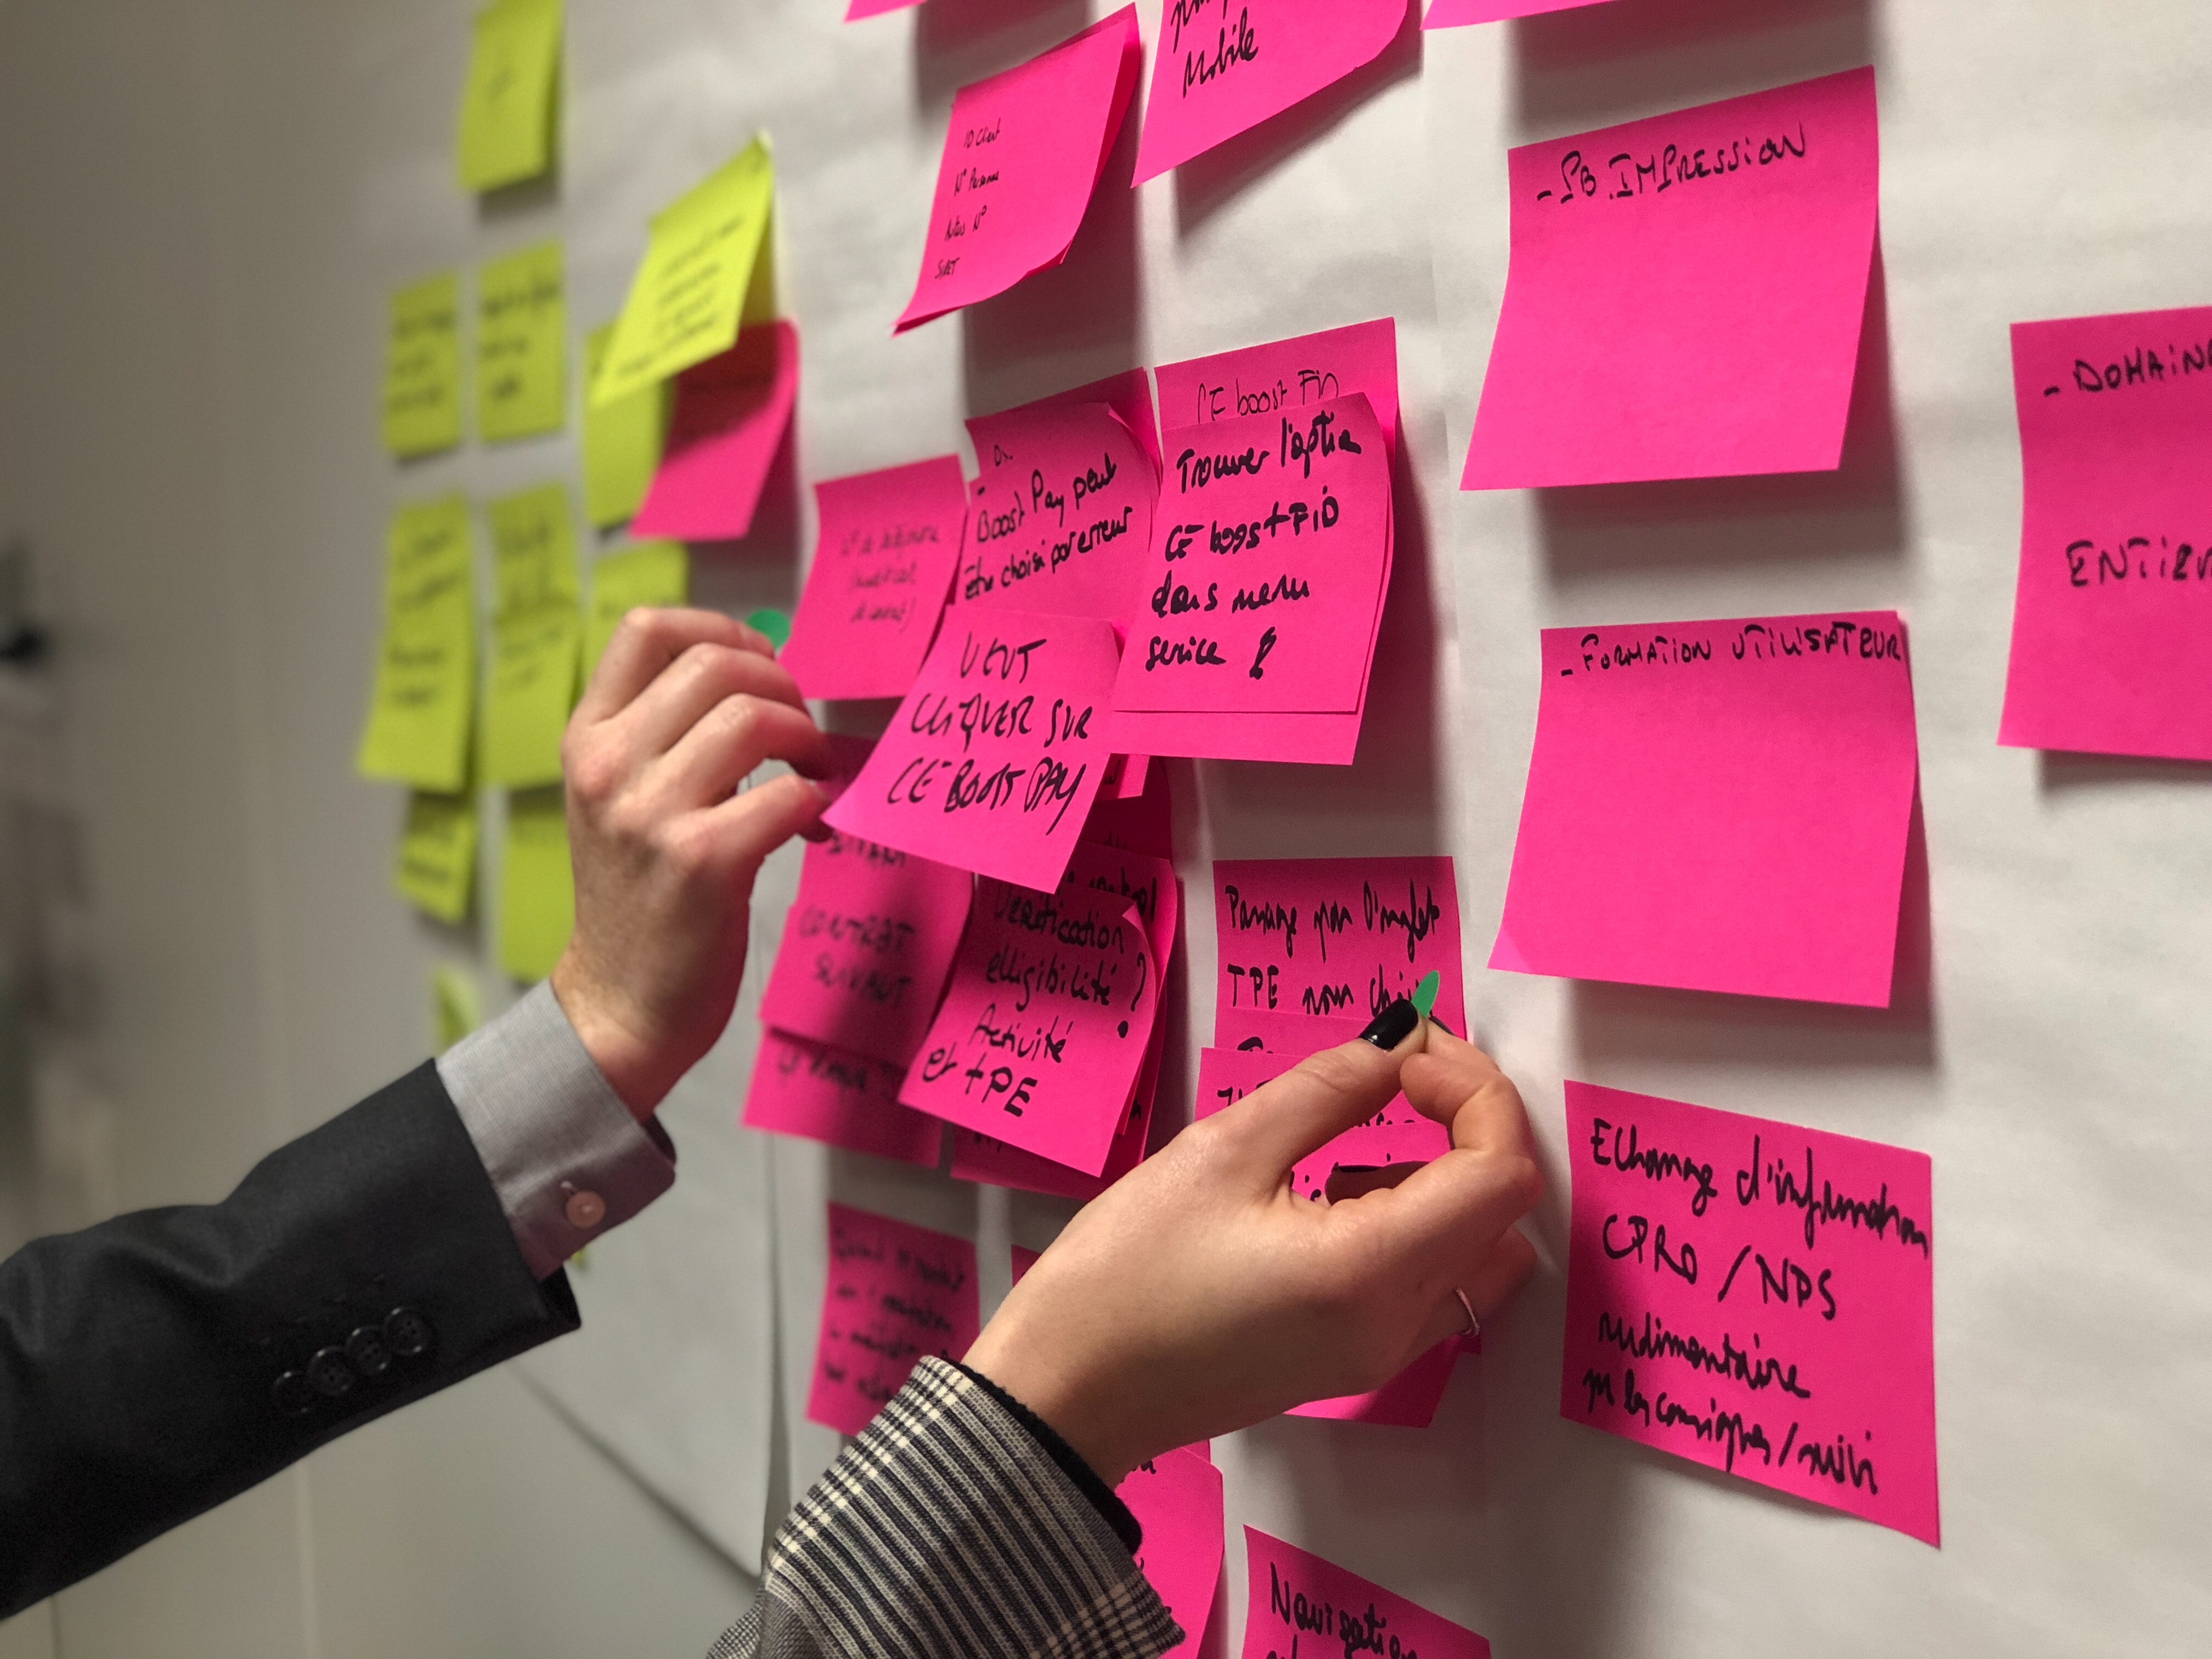 A wall filled with sticky notes. Two people are reaching and moving individual notes.